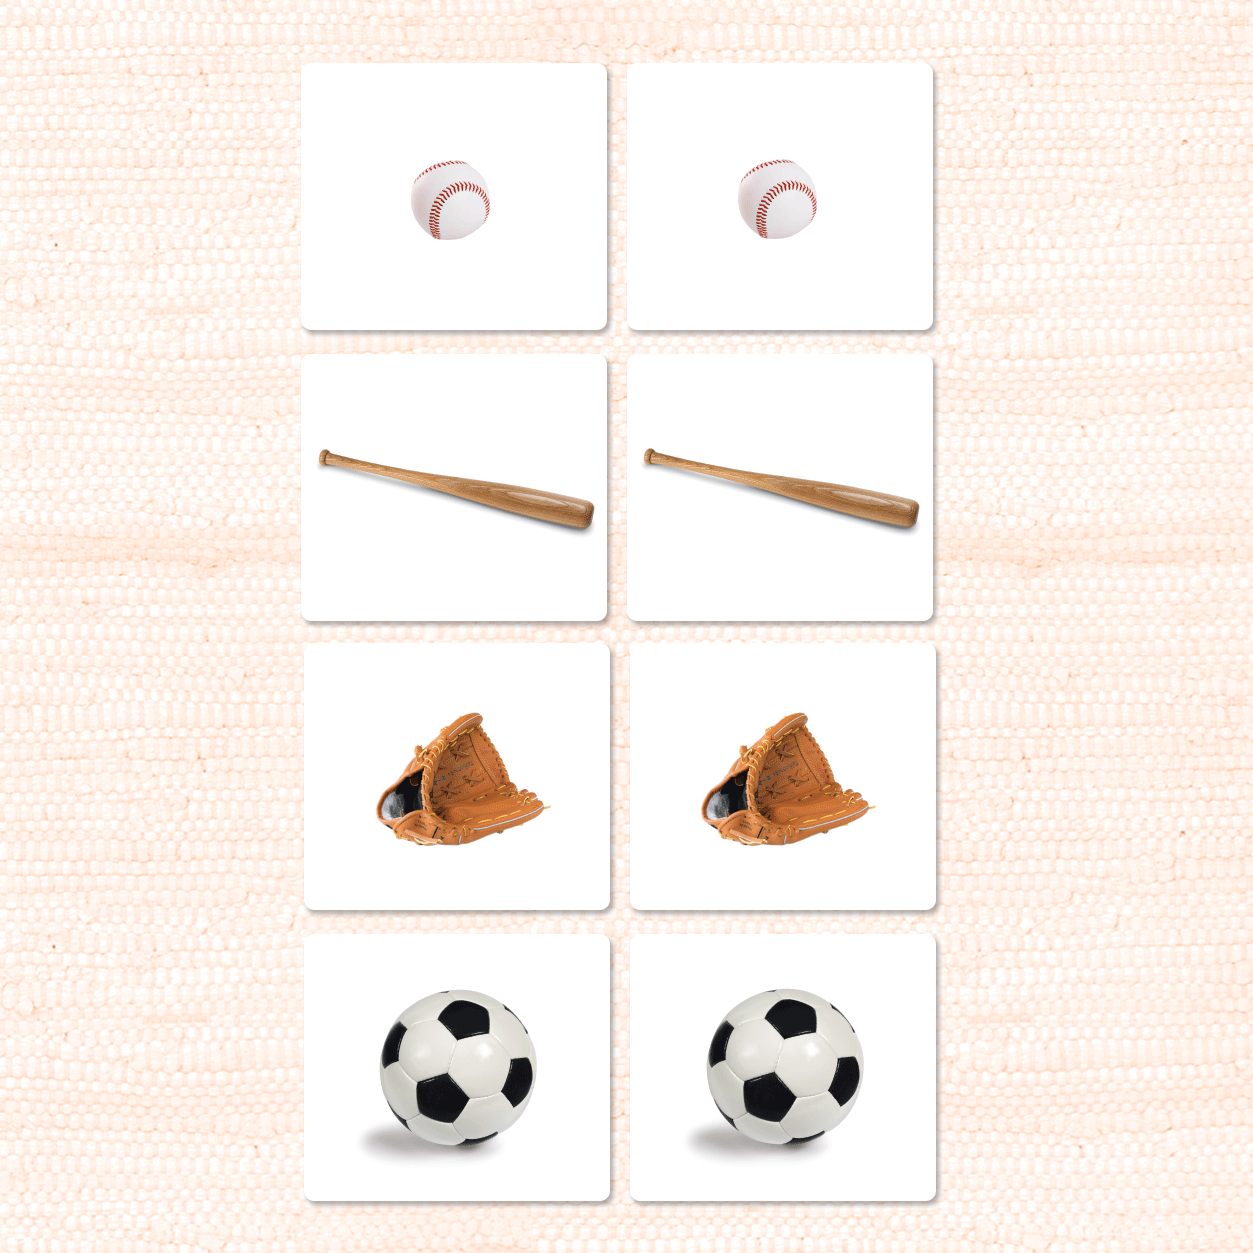 Imperfect Sports Equipment Matching - Maitri Learning